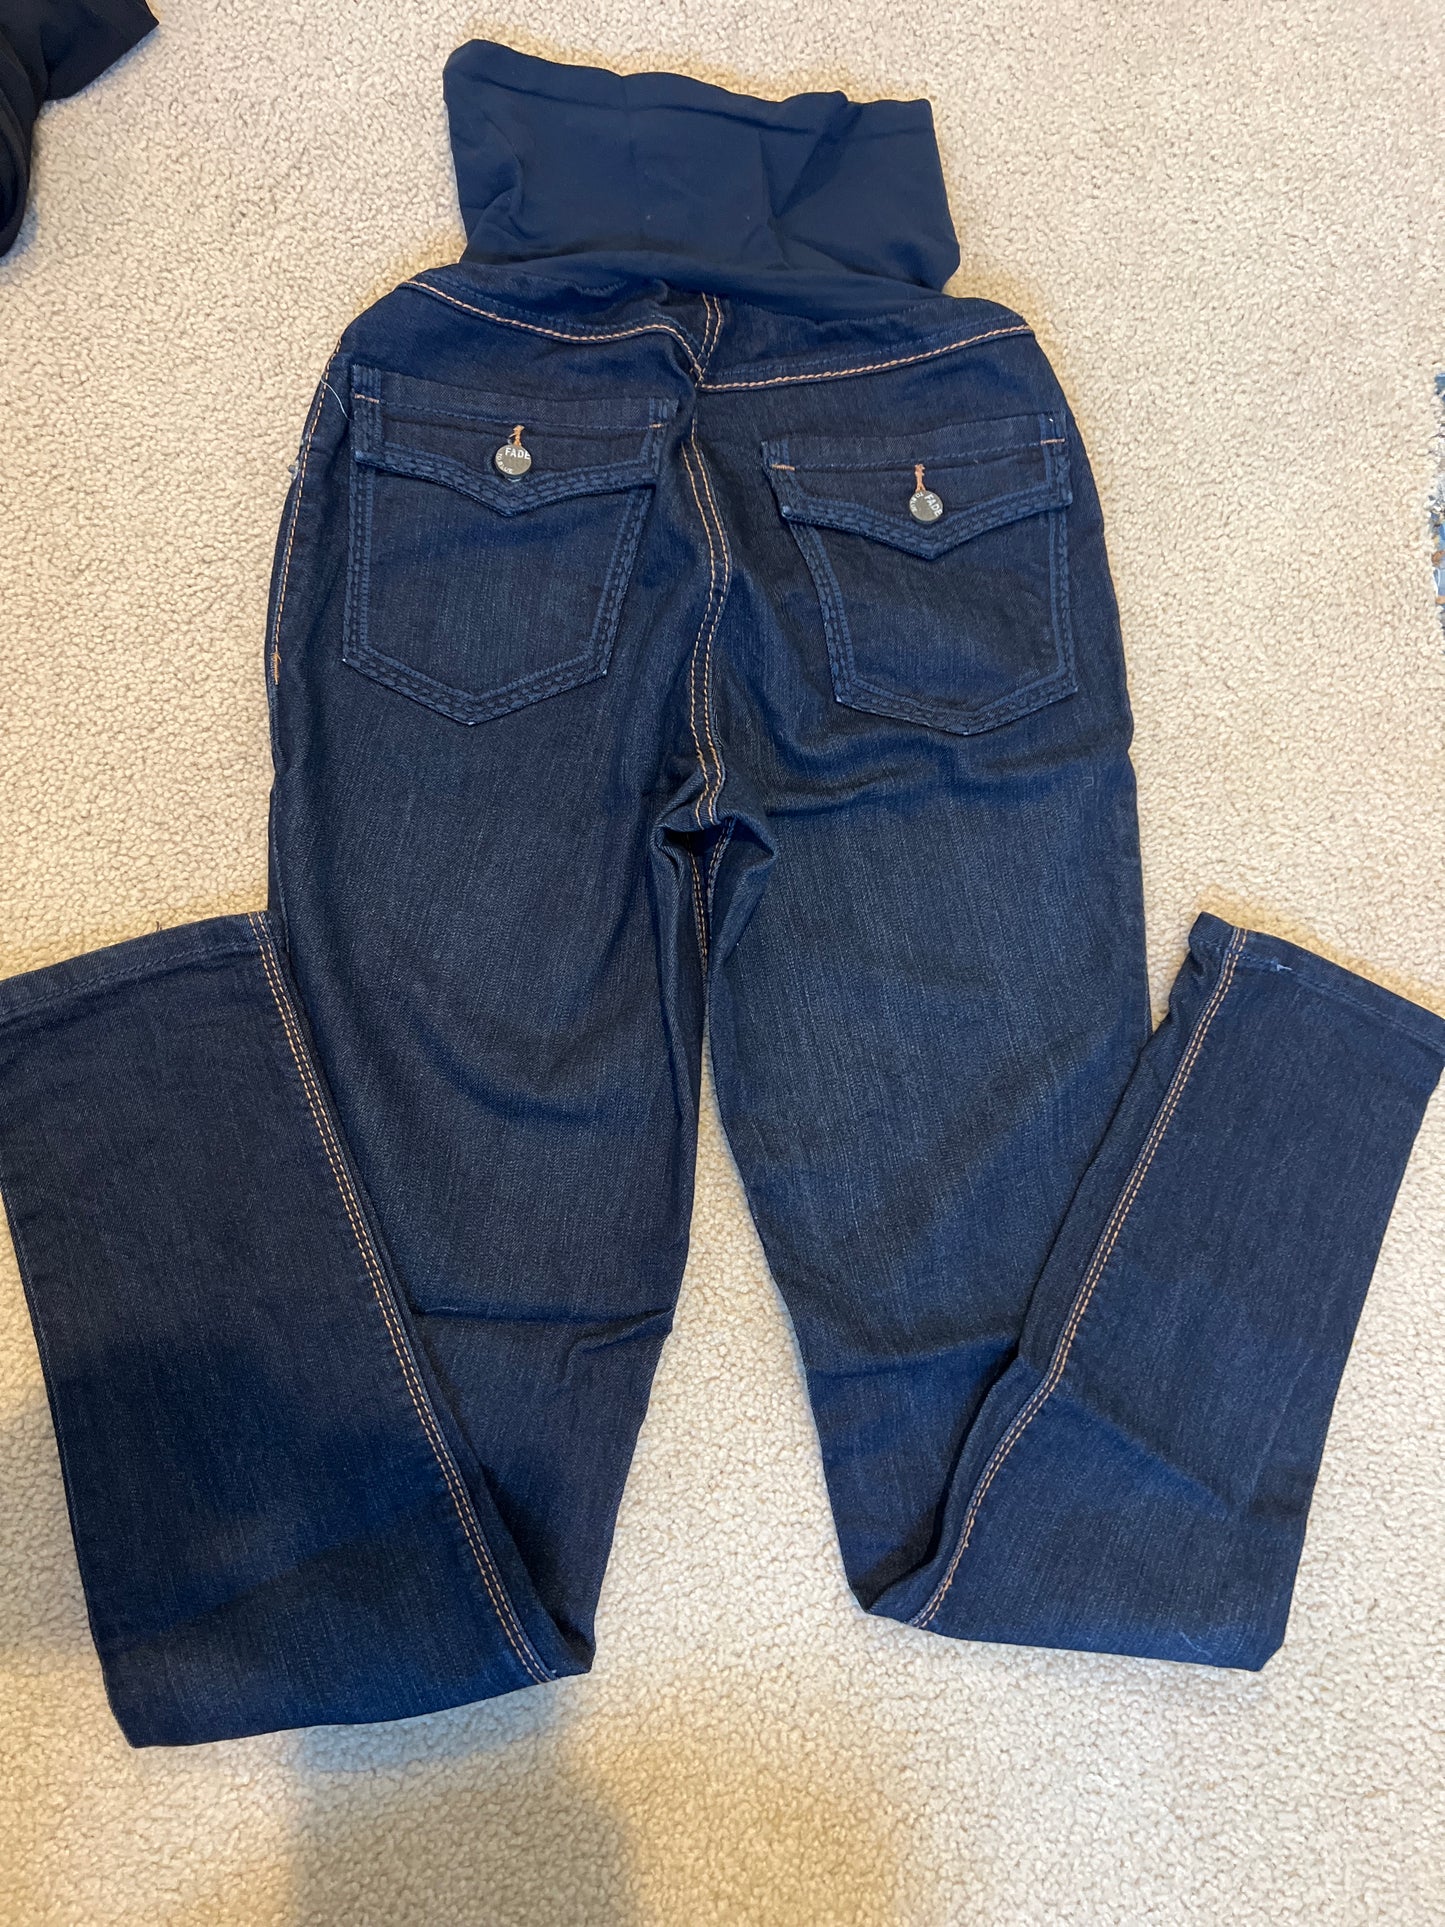 Fade to Blue Denim Maternity jeans, size small